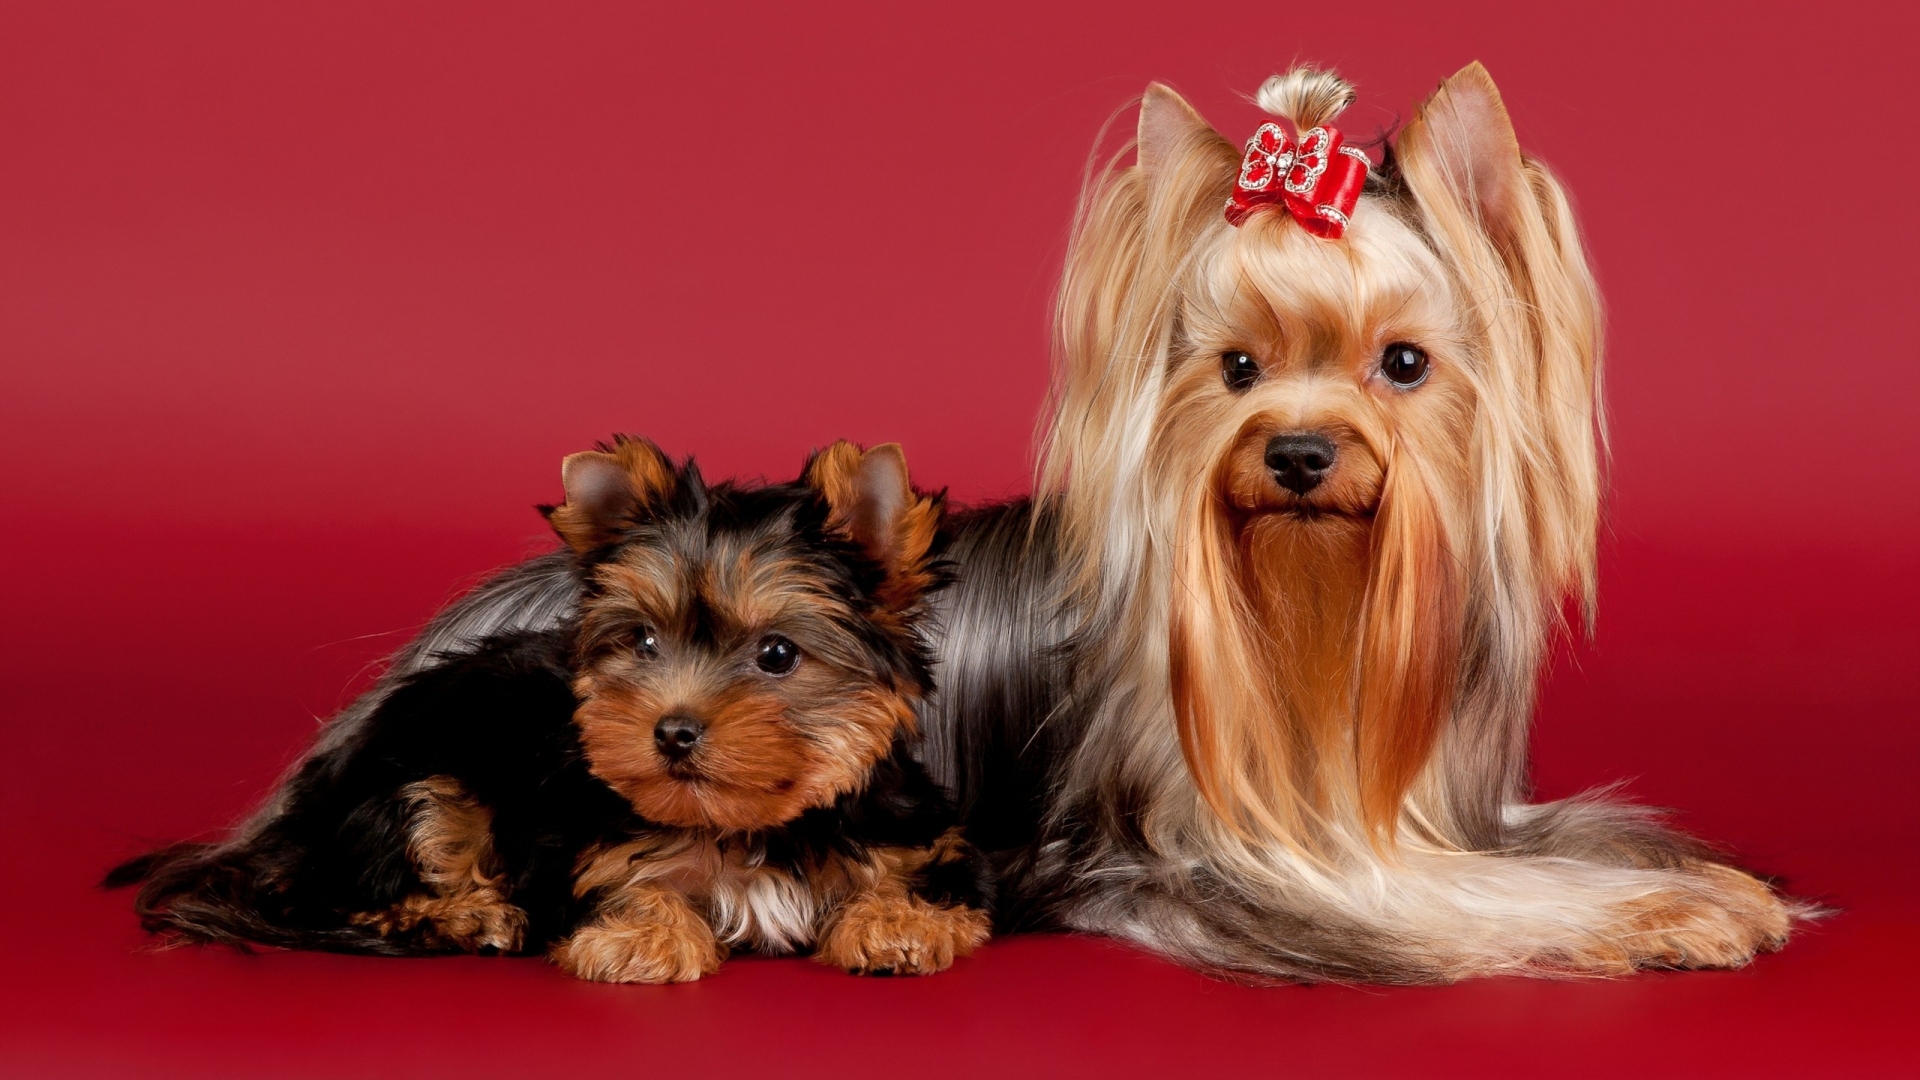 2 Cute Dogs for 1920 x 1080 HDTV 1080p resolution